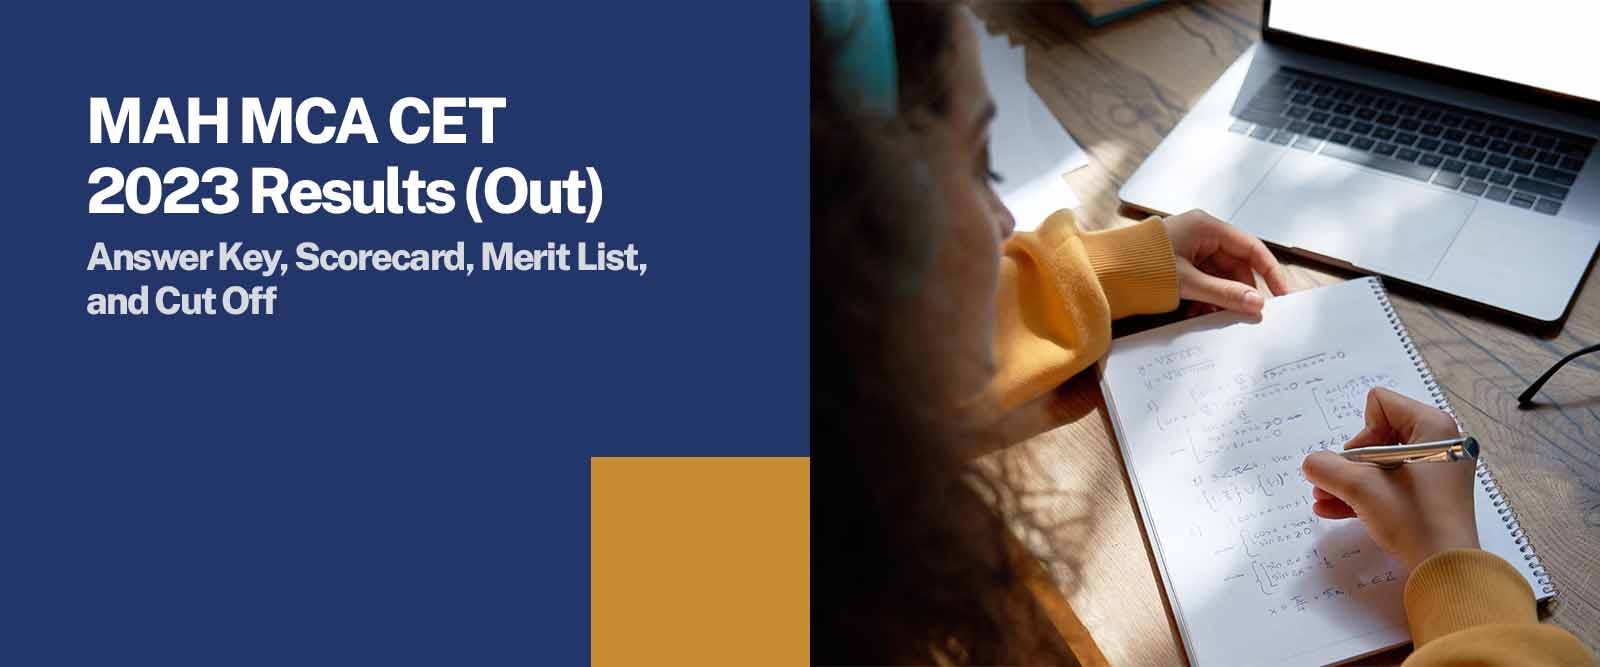 MAH MCA CET 2022 Results (Out): Answer Key, Scorecard, Merit List, and Cut Off